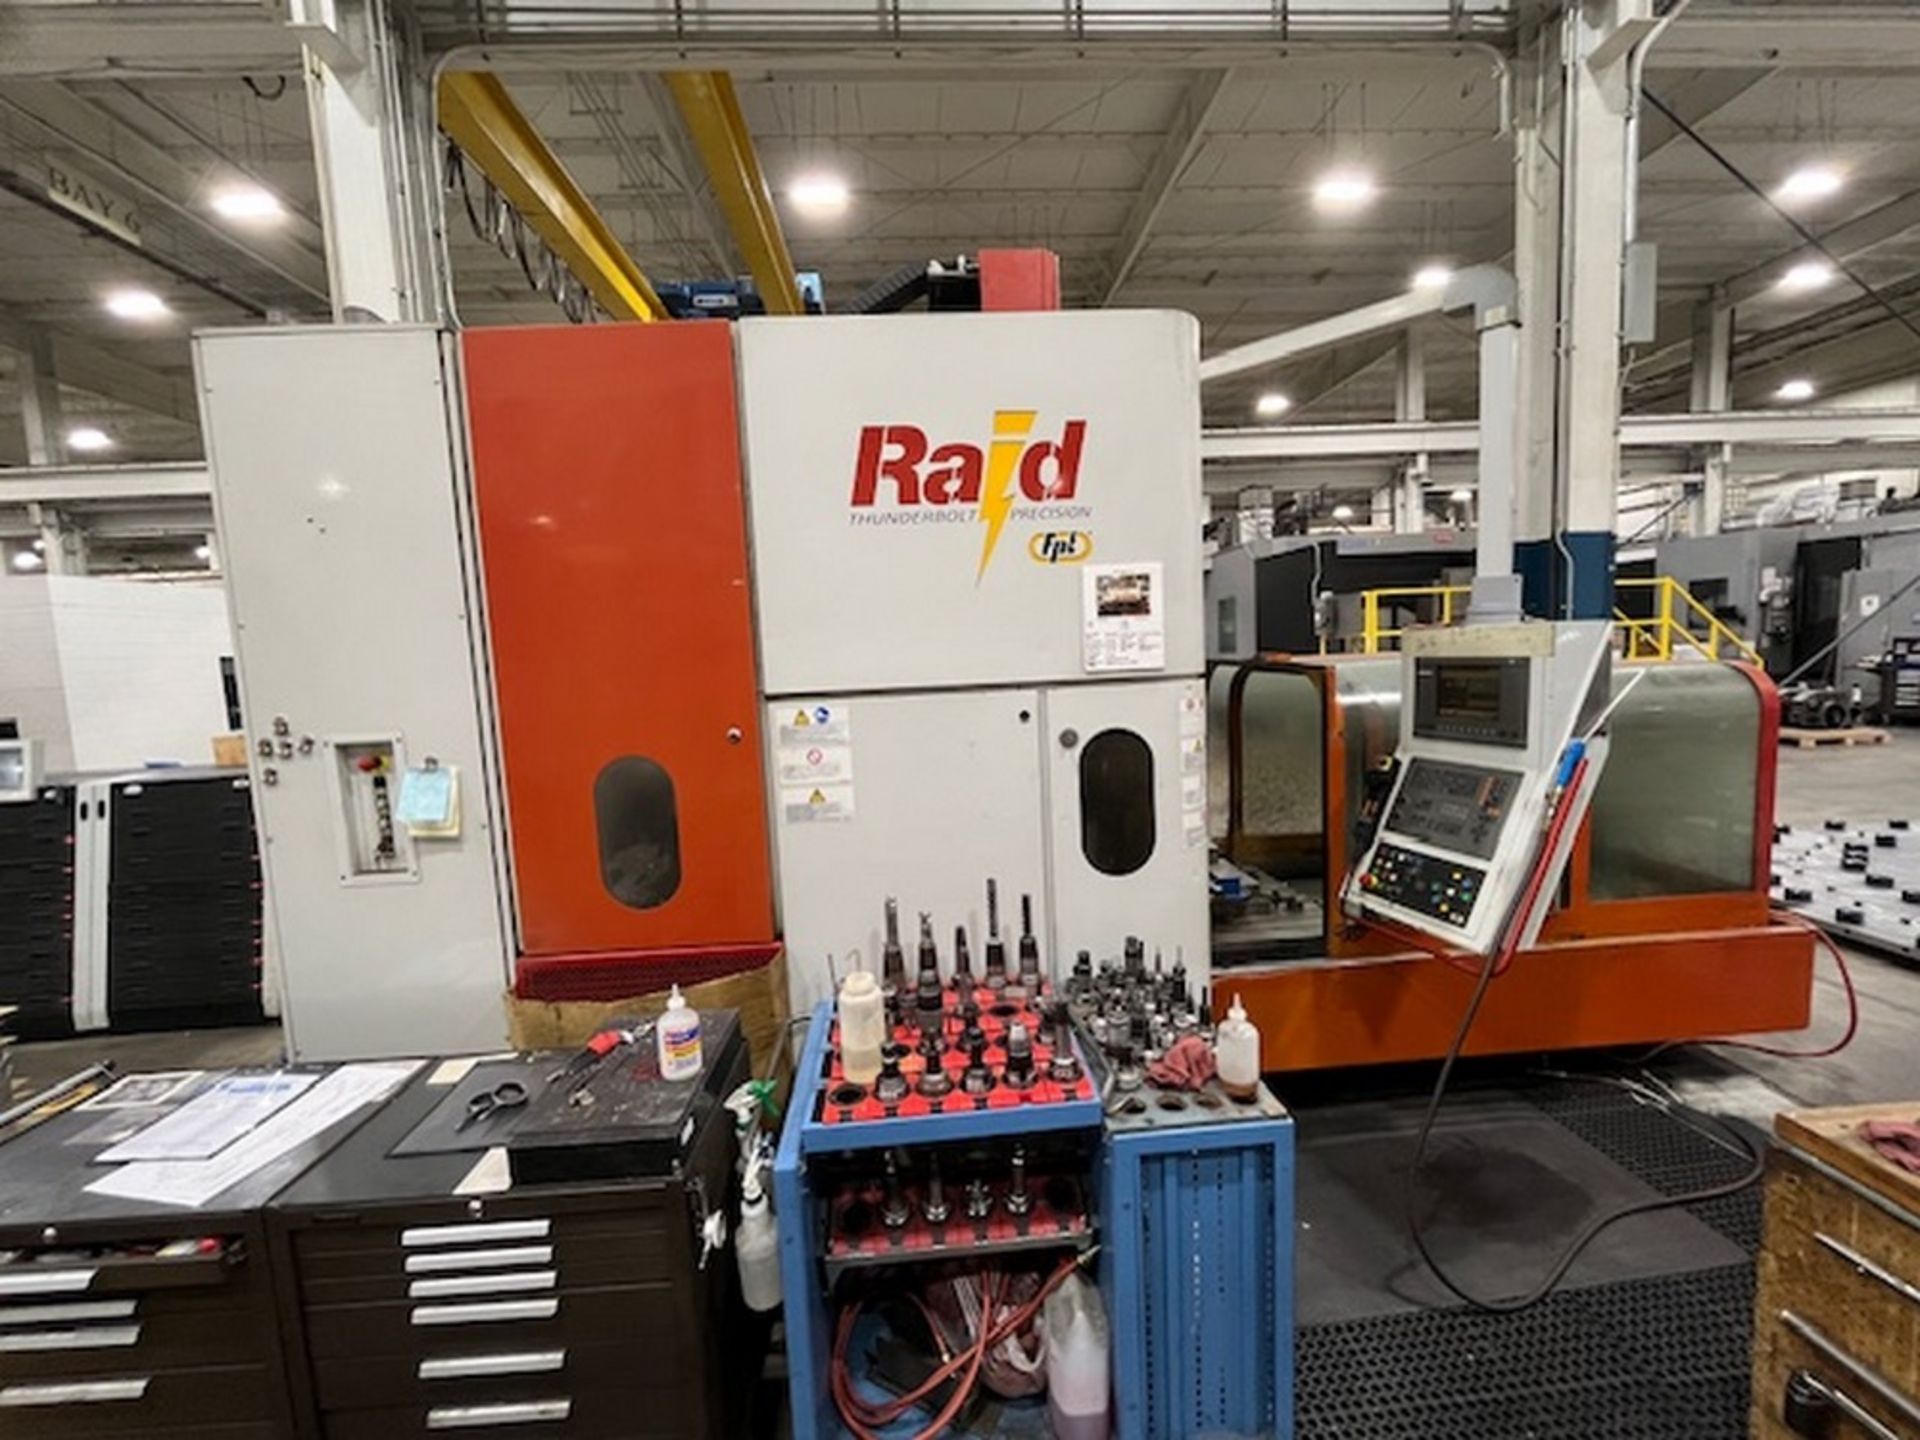 2003 FPT RAID Machining Center, 59" X 43" x 23" Travels, 18,000 RPM Spindle, HSK 63 Spindle Taper, - Image 7 of 8